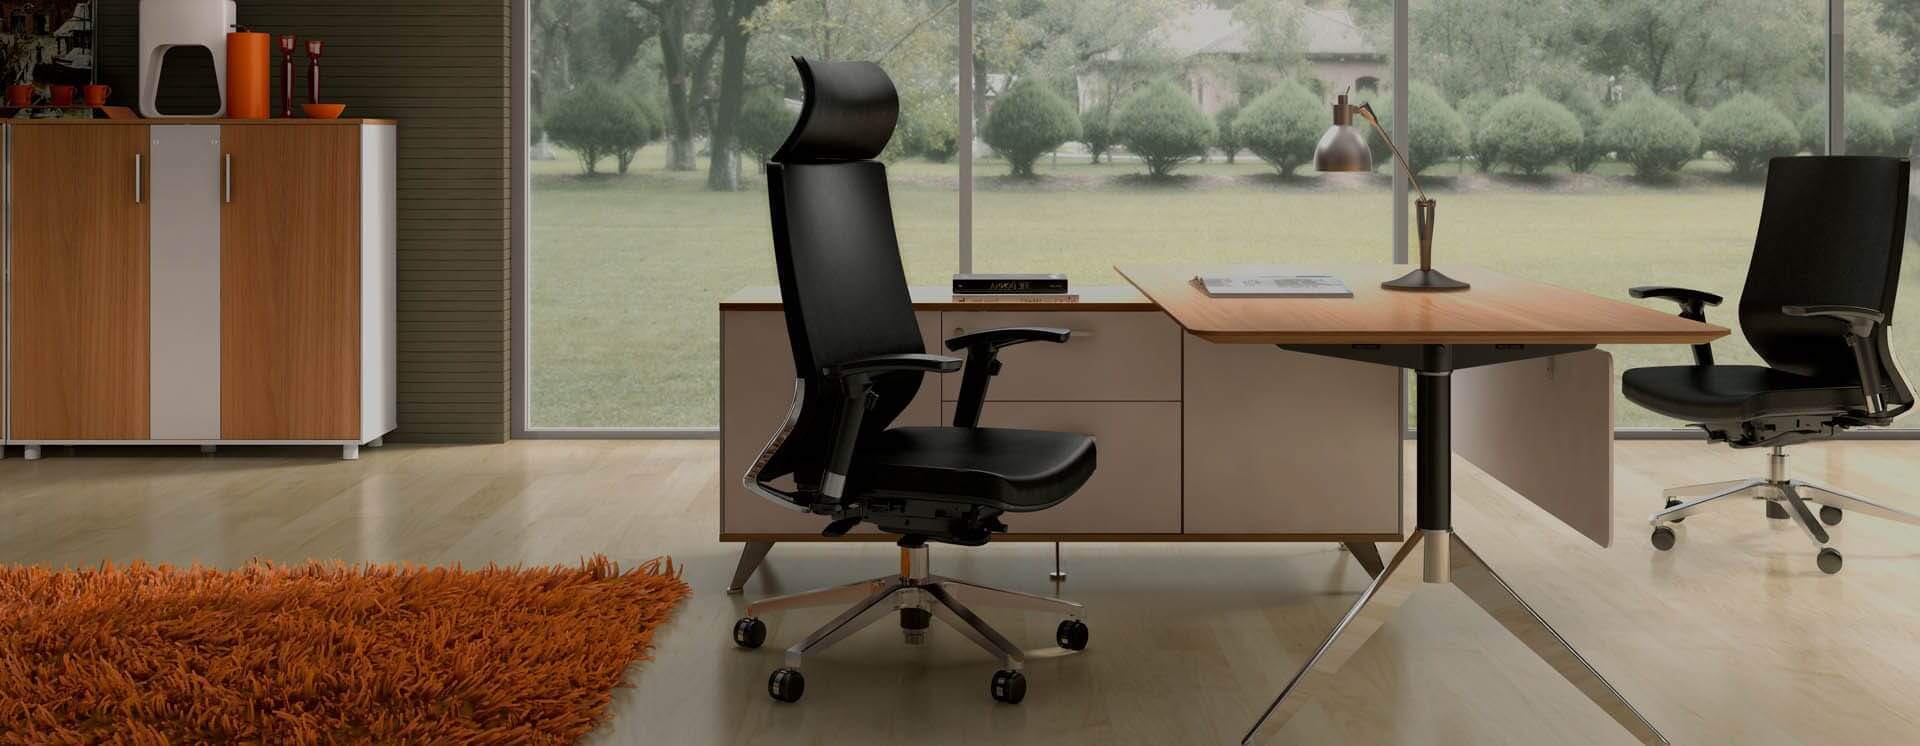 Office Furniture Melbourne Home Office Desks Cabinets Chairs